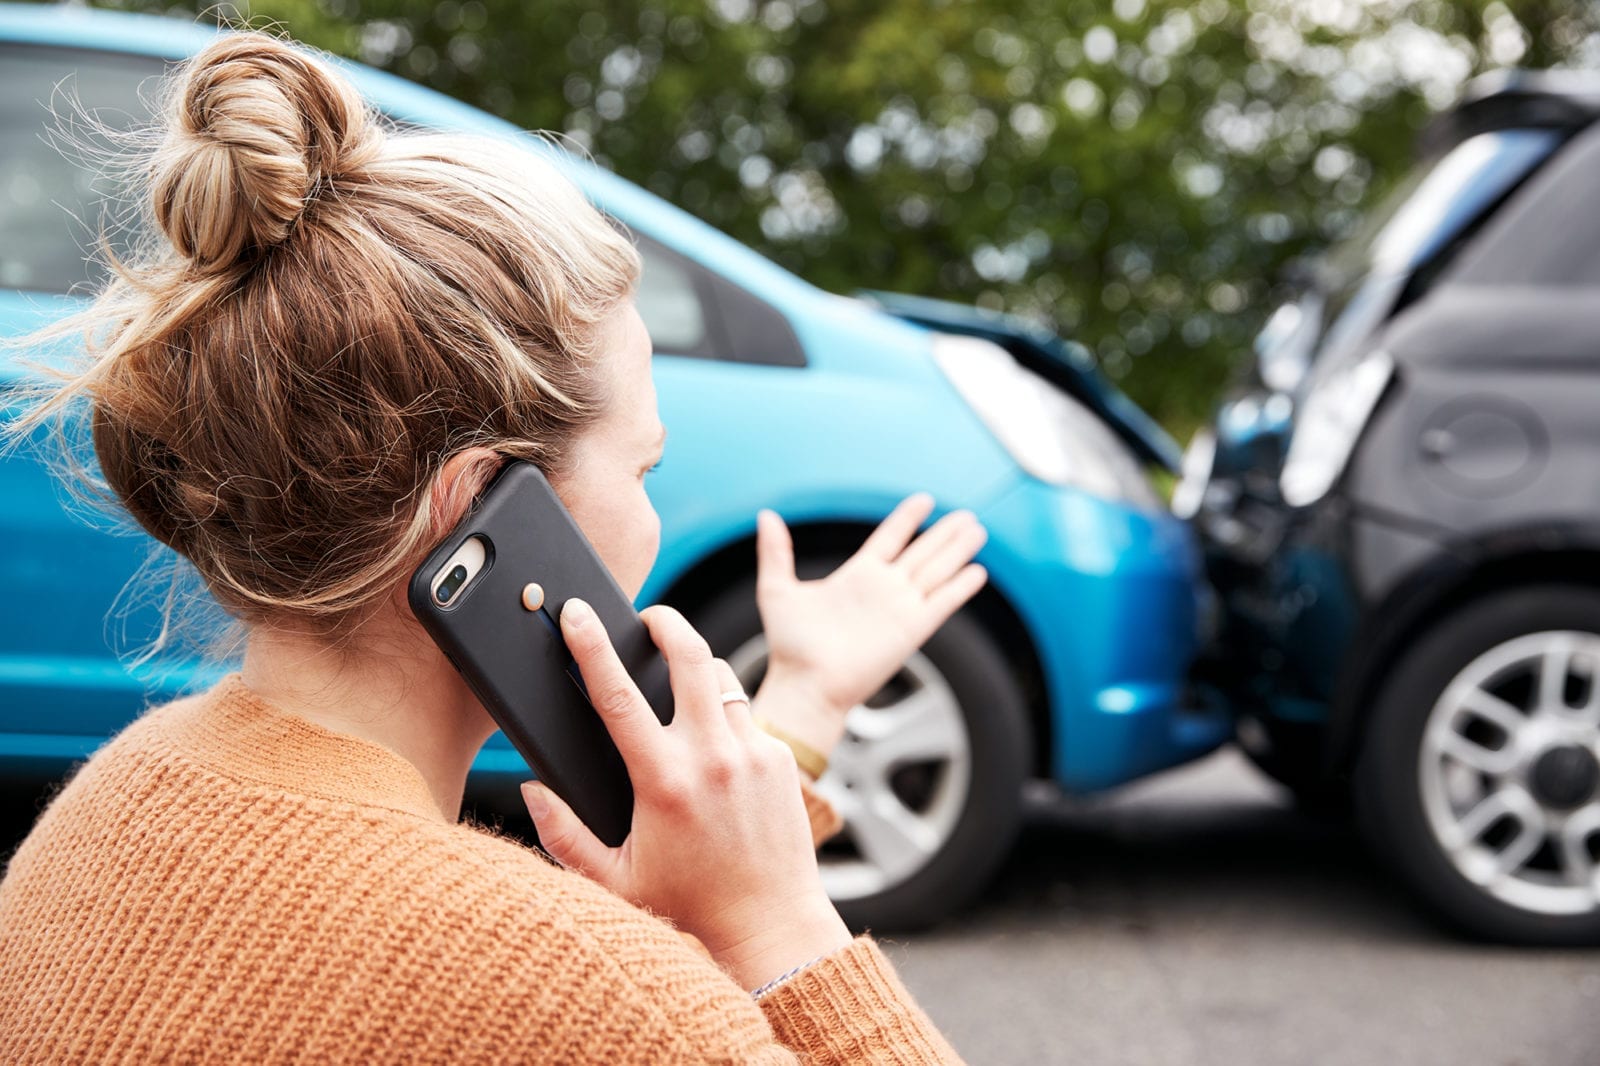 Top tips to prevent being in a car accident